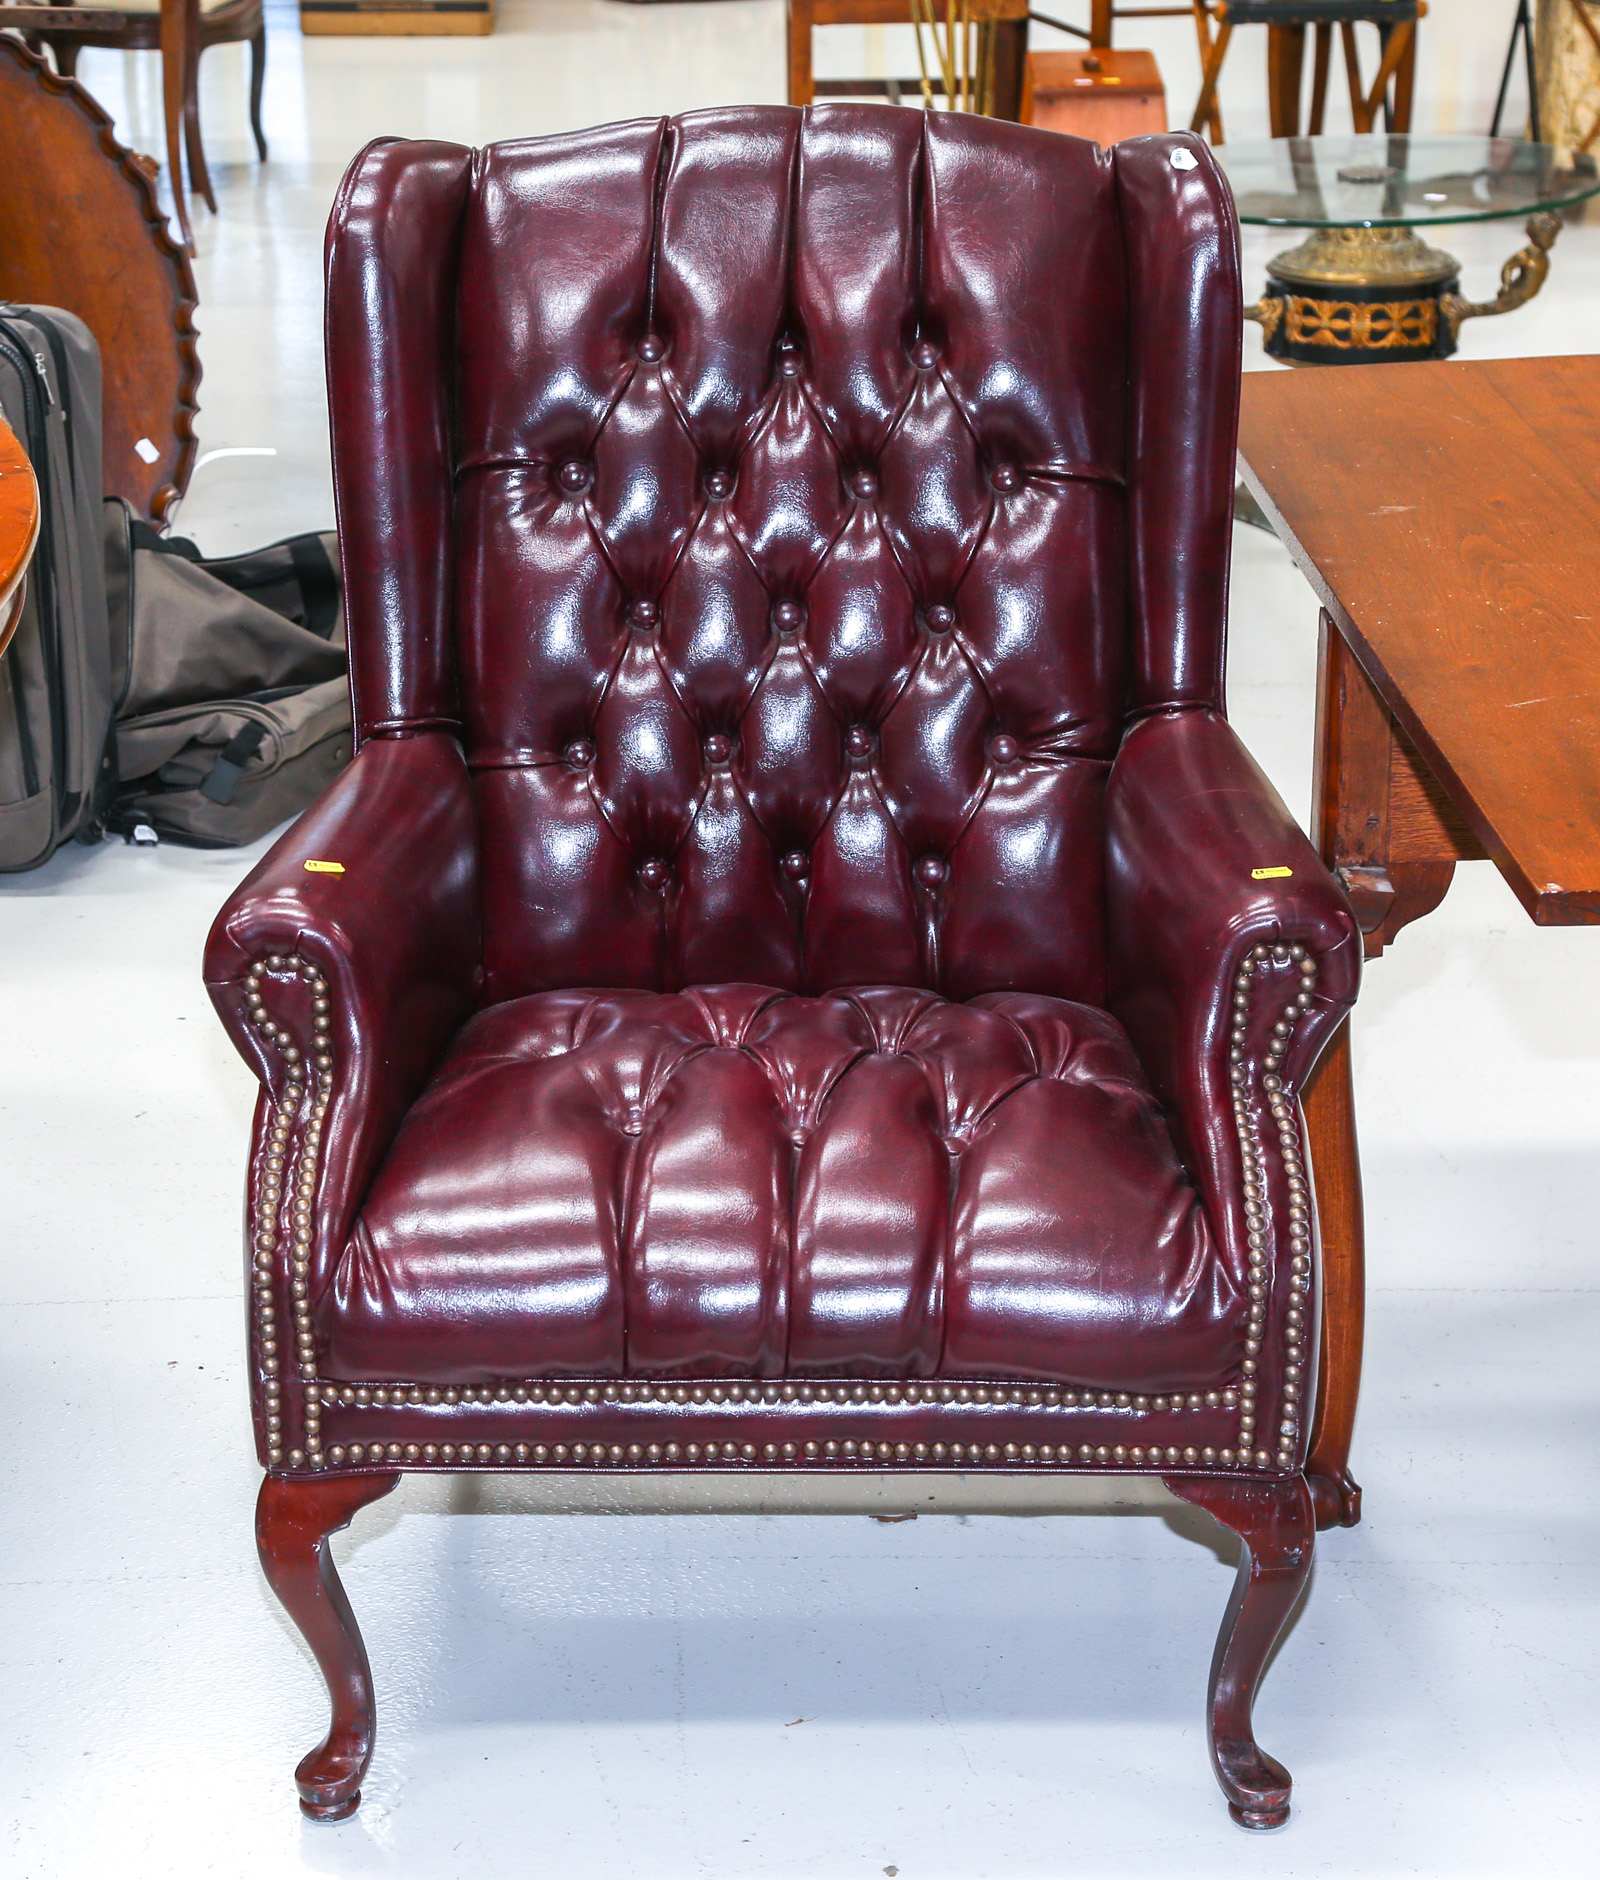 QUEEN ANNE STYLE WING CHAIR 3rd